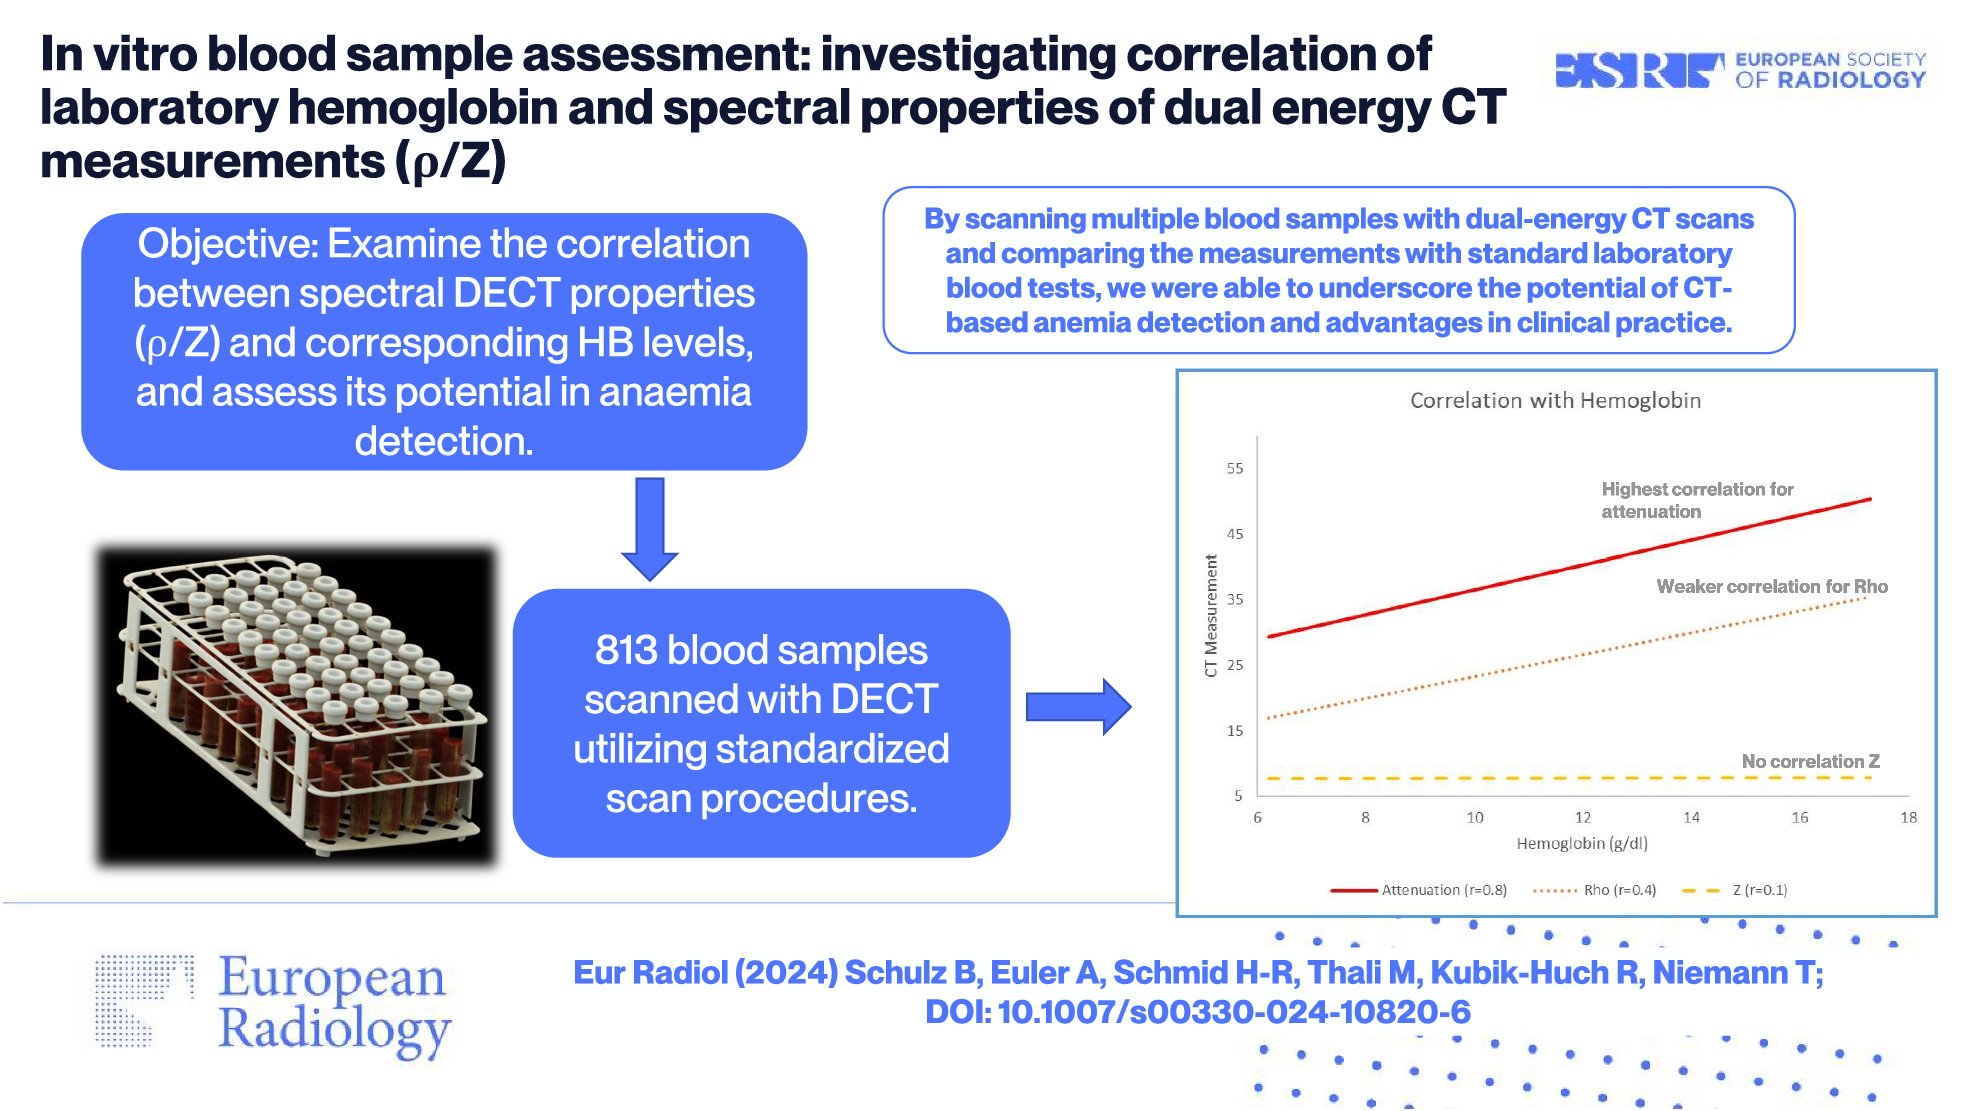 In vitro blood sample assessment: investigating correlation of laboratory hemoglobin and spectral properties of dual-energy CT measurements (ρ/Z)